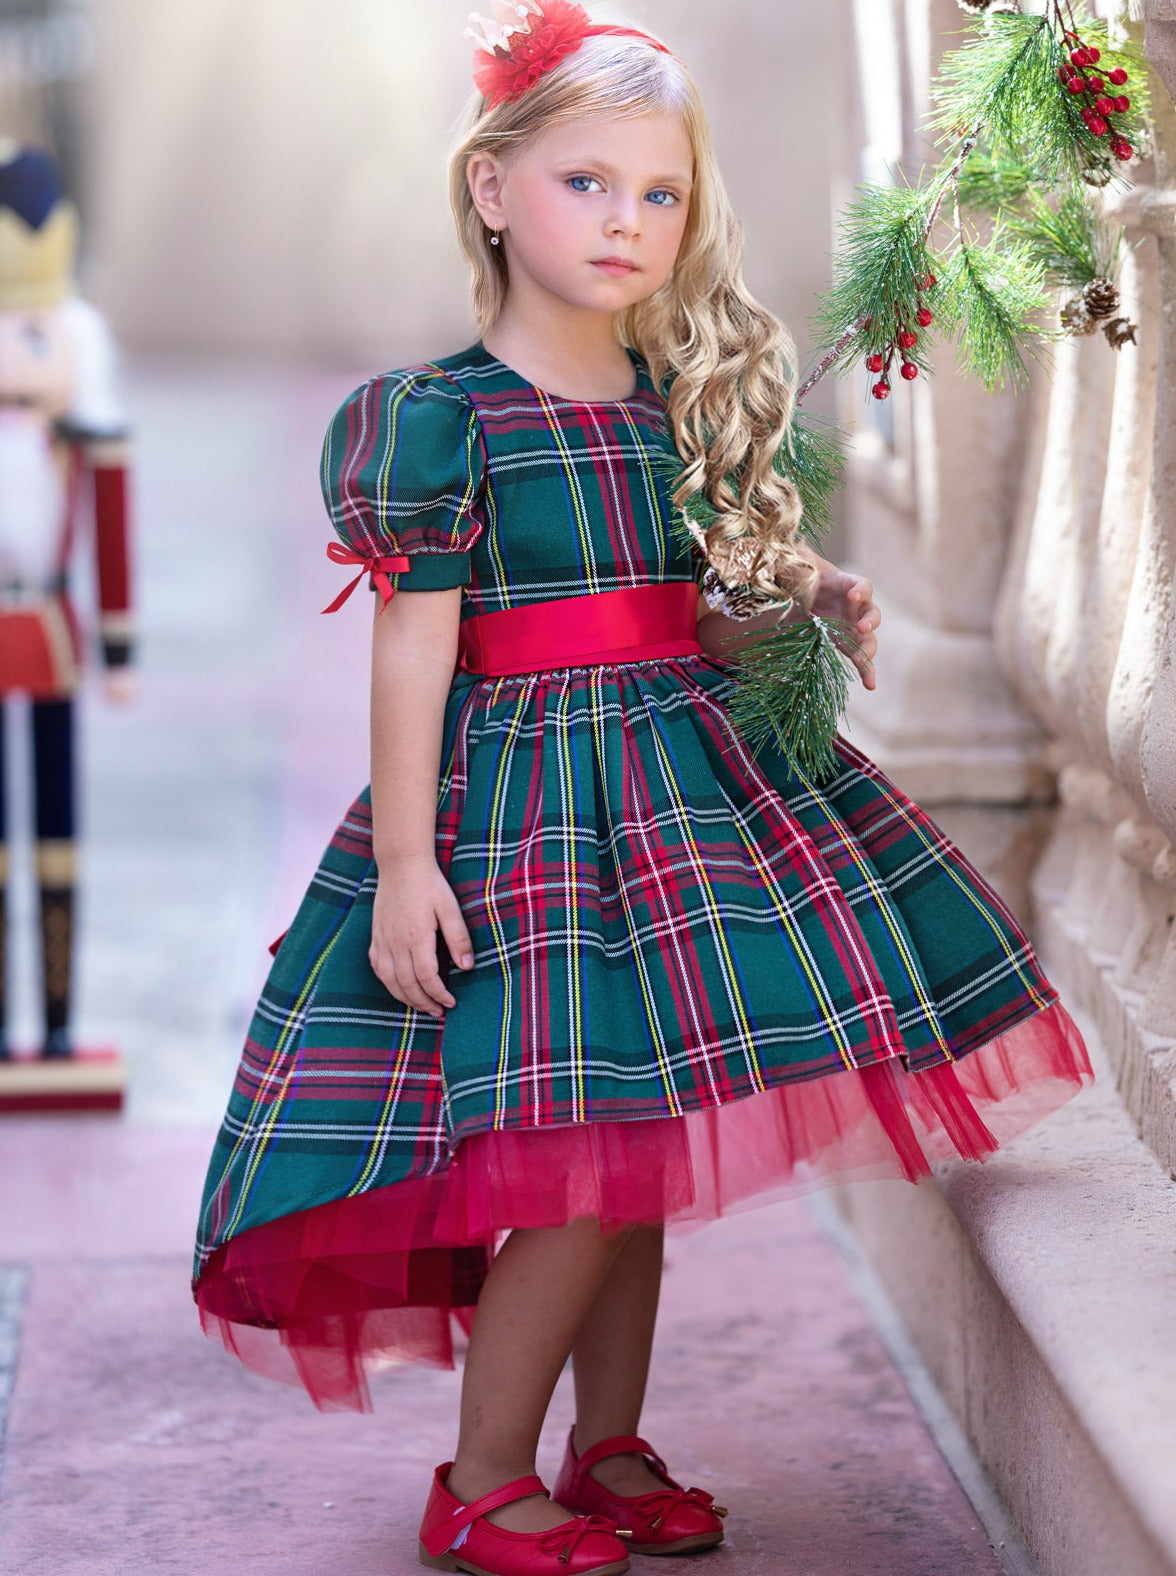 Classy and Cozy Blue Winter Wear Girls Dress | Girls winter dresses, Classy winter  outfits, Stylish winter outfits